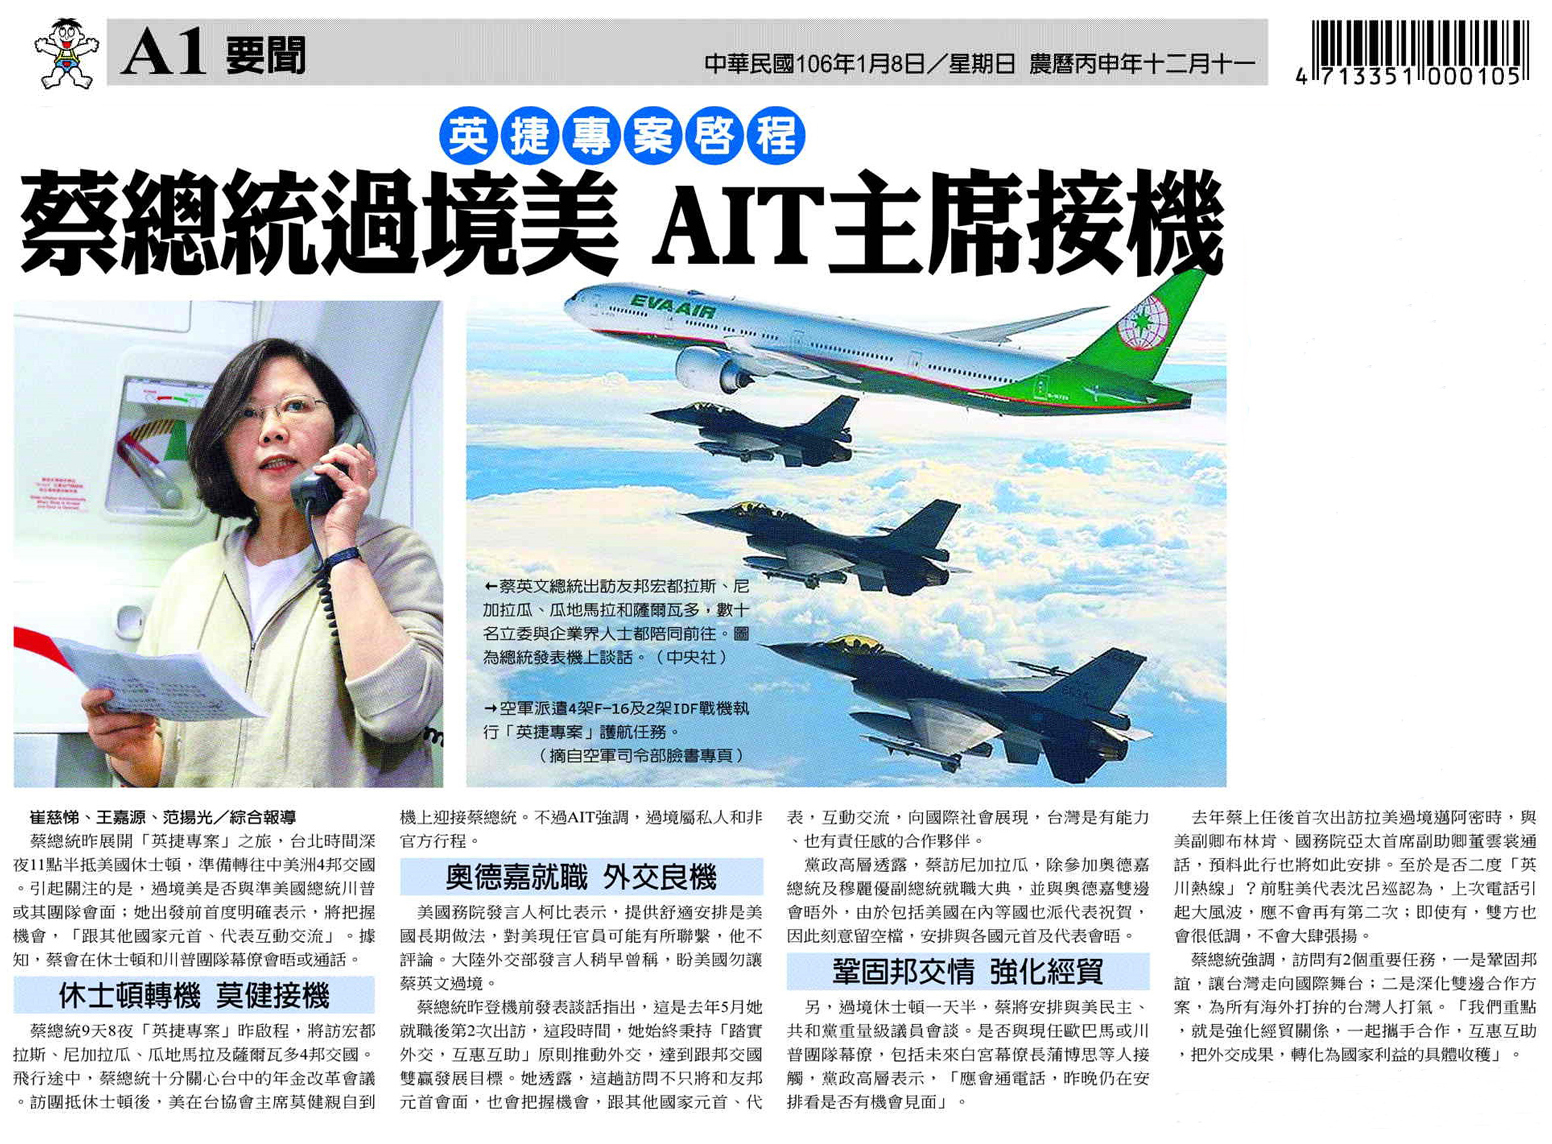 “Ing-Jie Project” begins: AIT chairman welcomes President Tsai at airport during her stopover in US